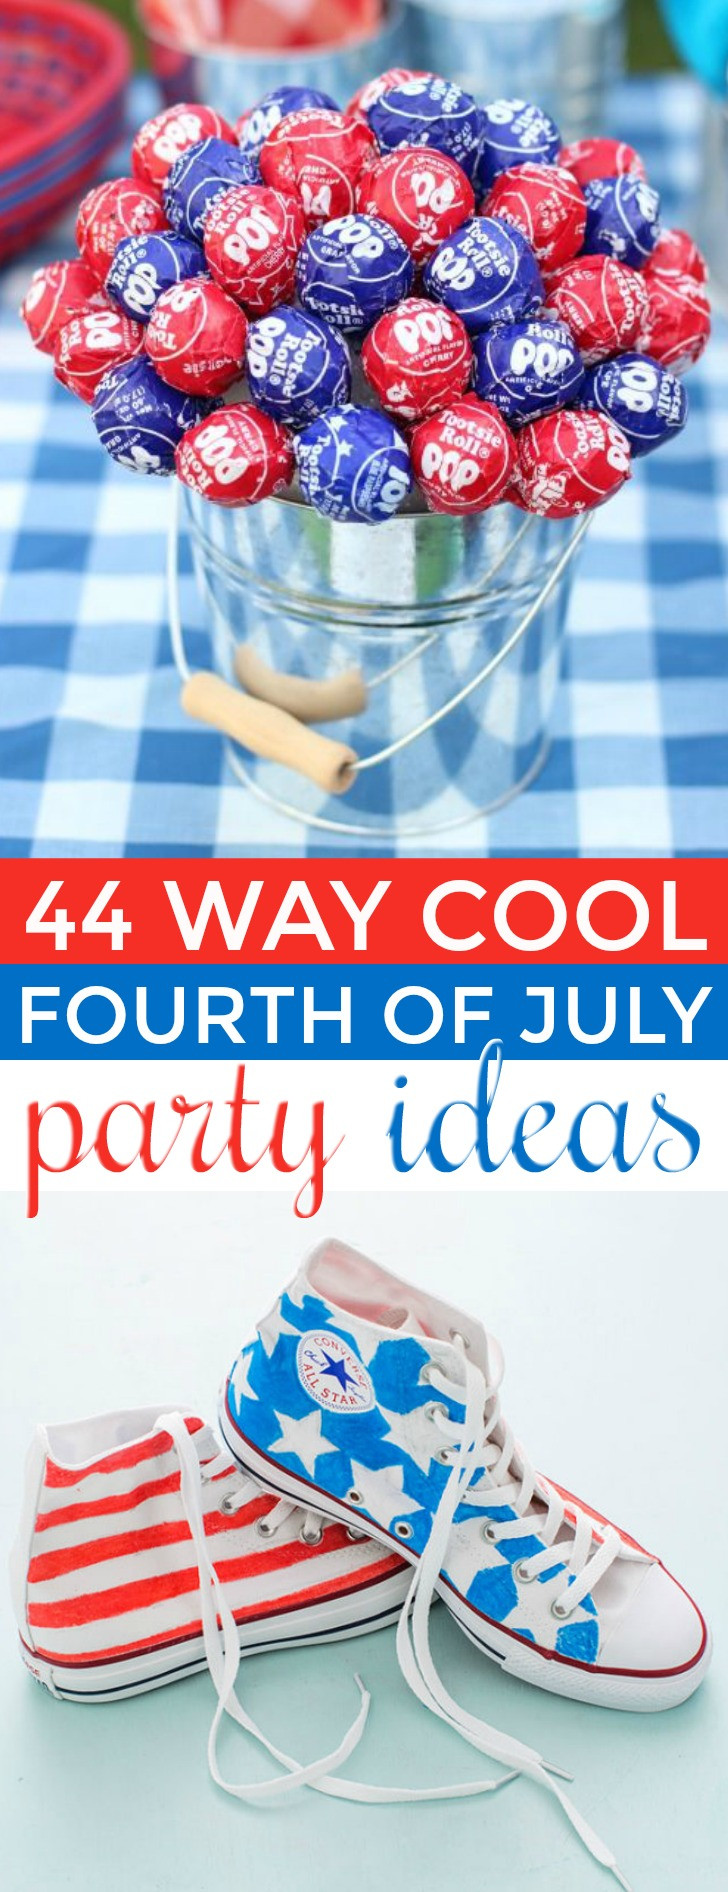 4th Of July Vacation Ideas
 44 Way Cool Fourth of July Party Ideas